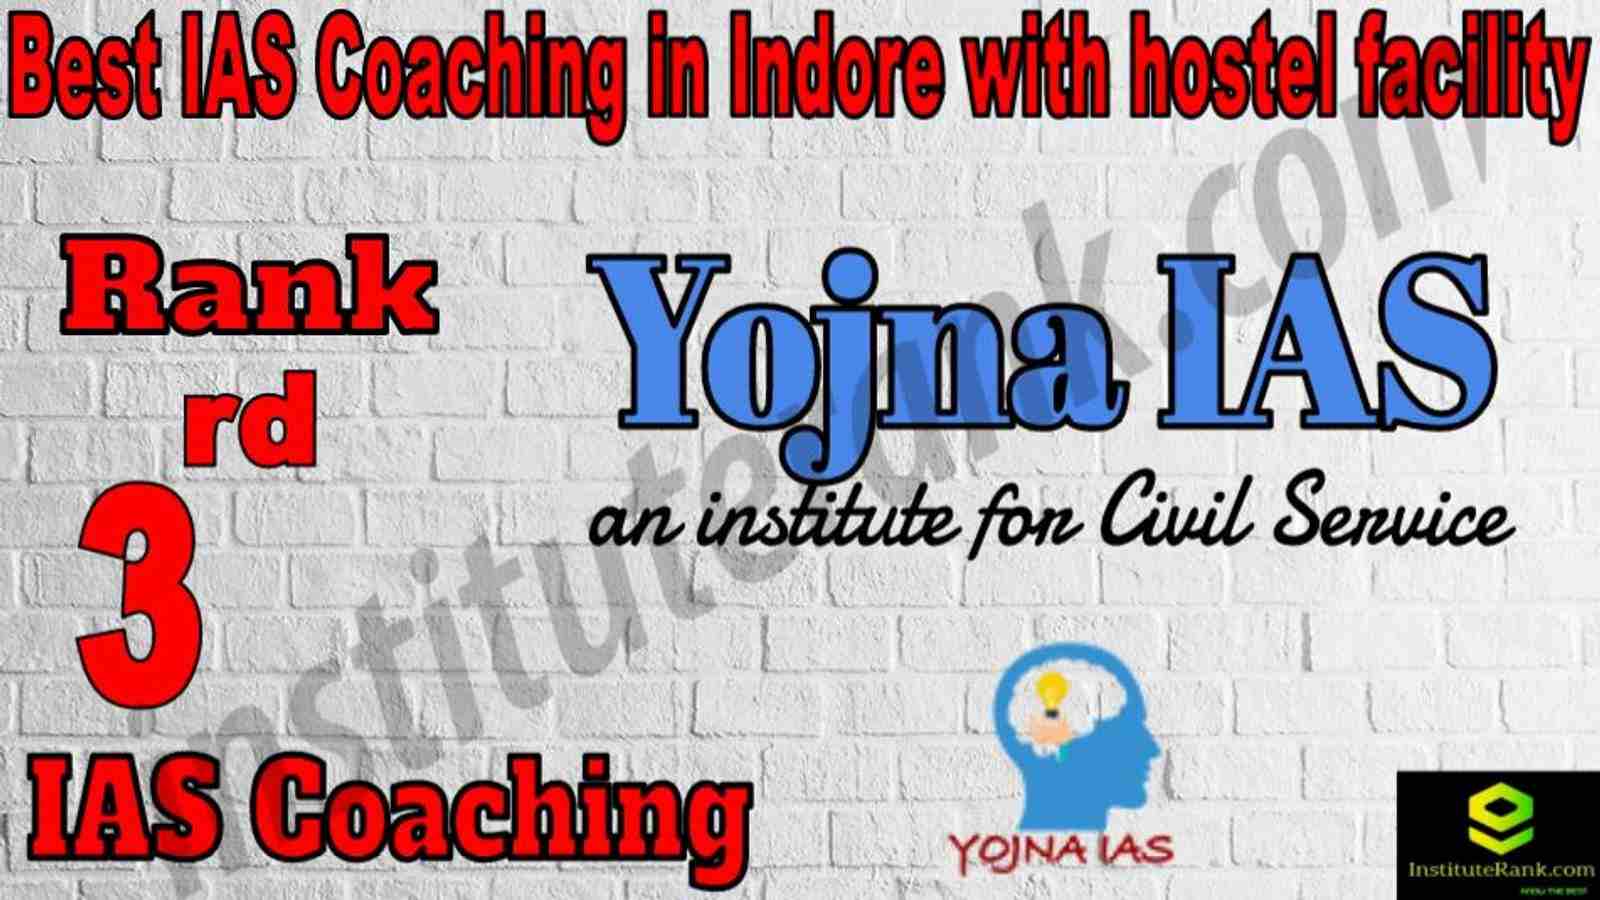 3rd Best IAS Coaching in Indore with hostel Facility